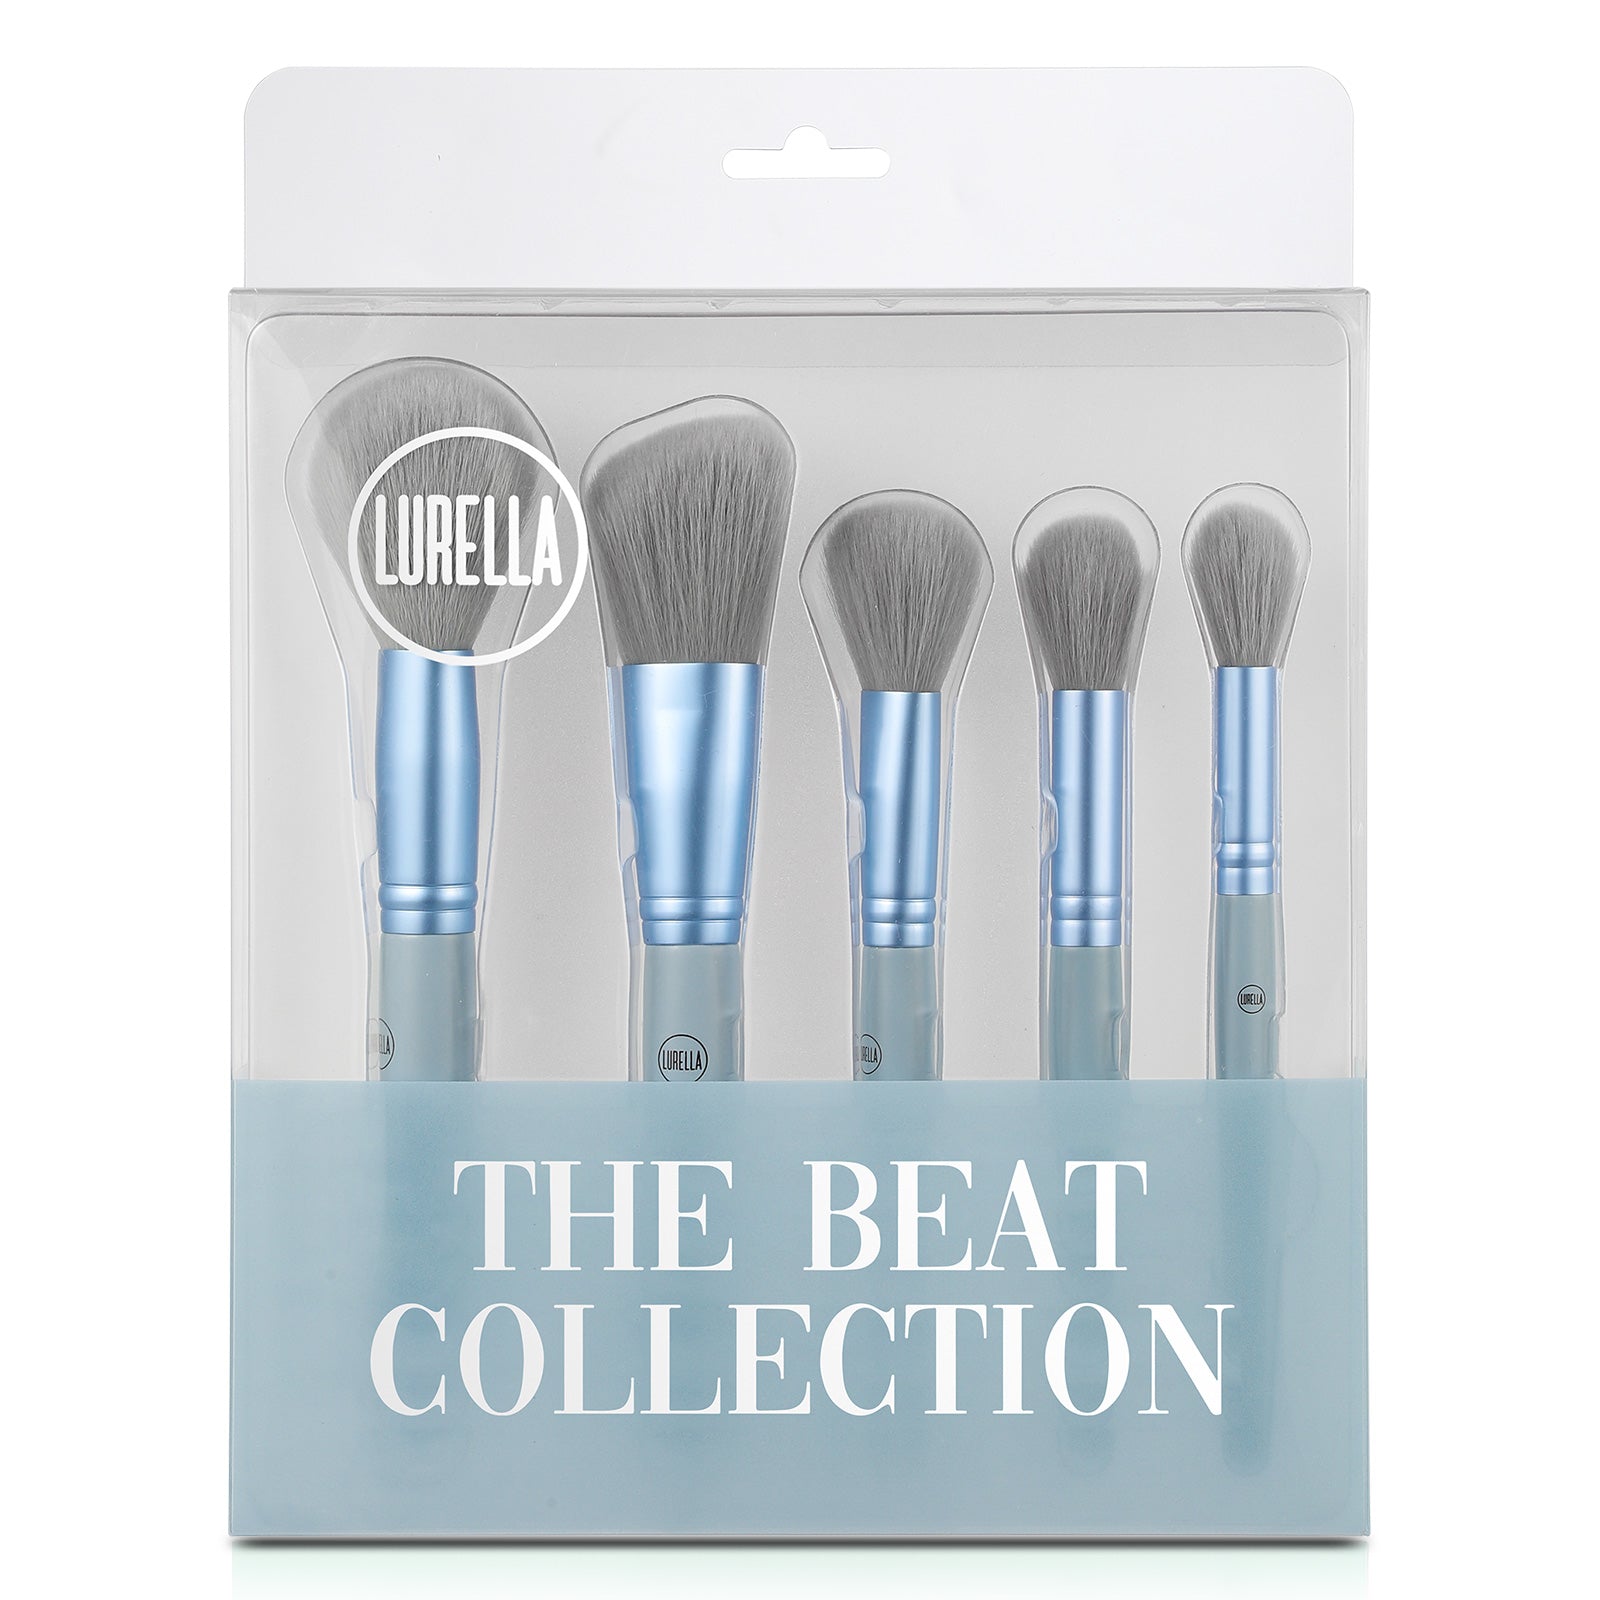 The Beat Collection